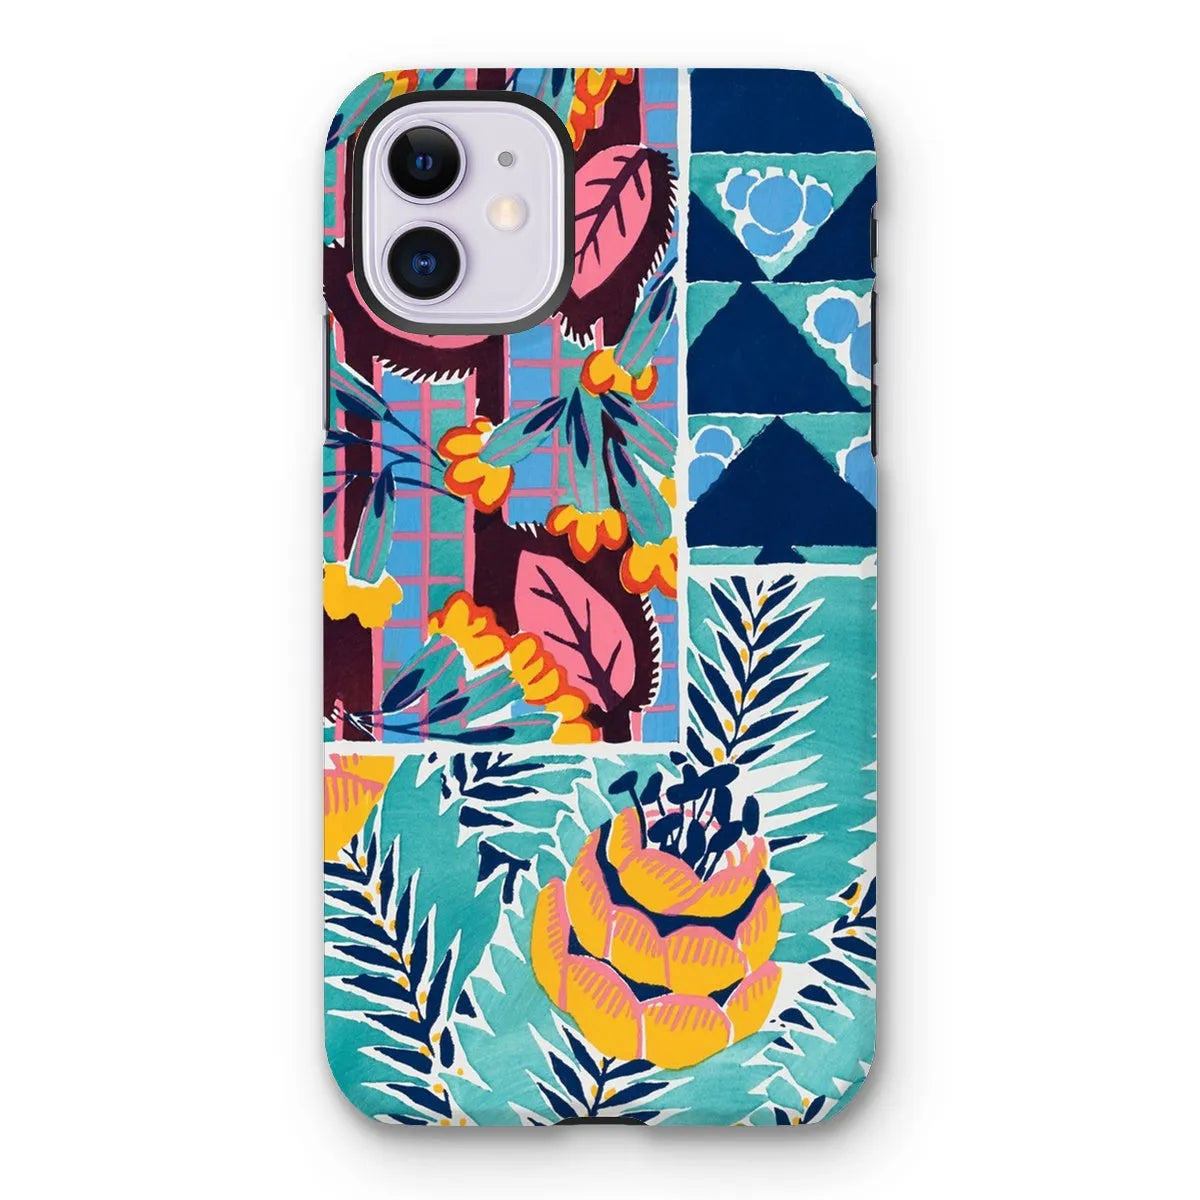 Fabric & Rugs - Pochoir Patterns Phone Case - E. A. Séguy - Iphone 11 / Matte - Mobile Phone Cases - Aesthetic Art